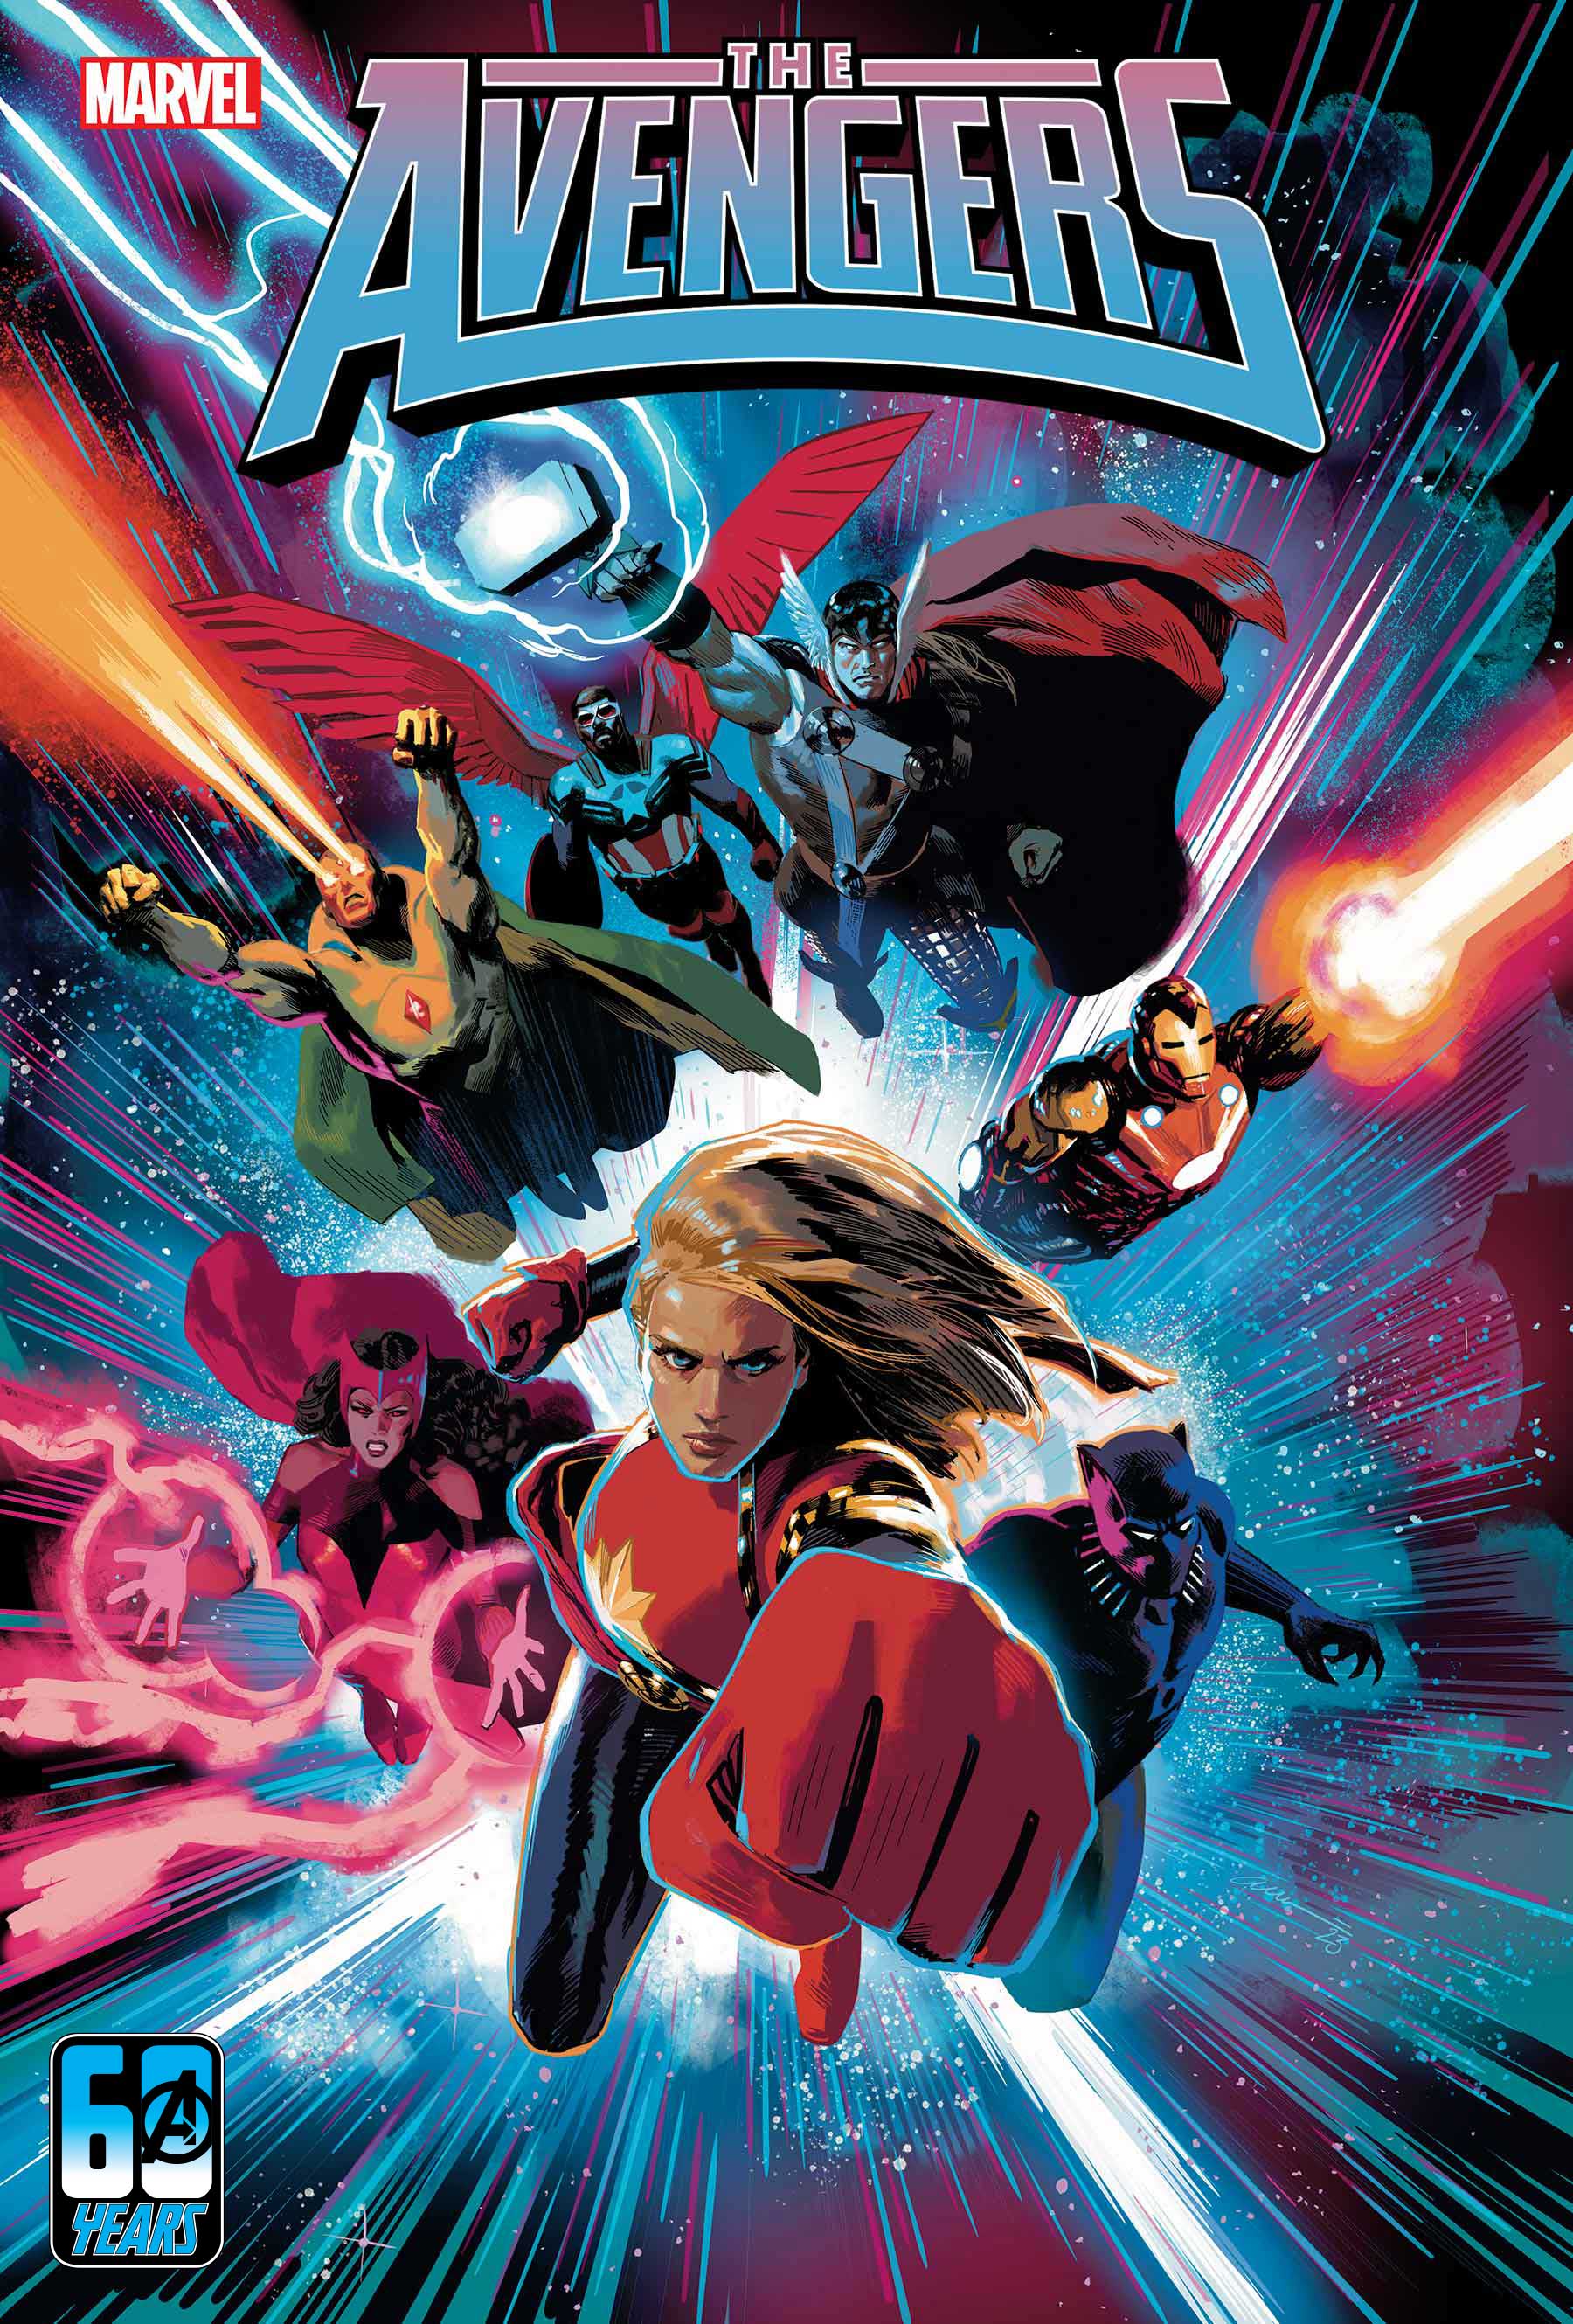 Illustrated comic cover featuring avengers led by Captain Marvel